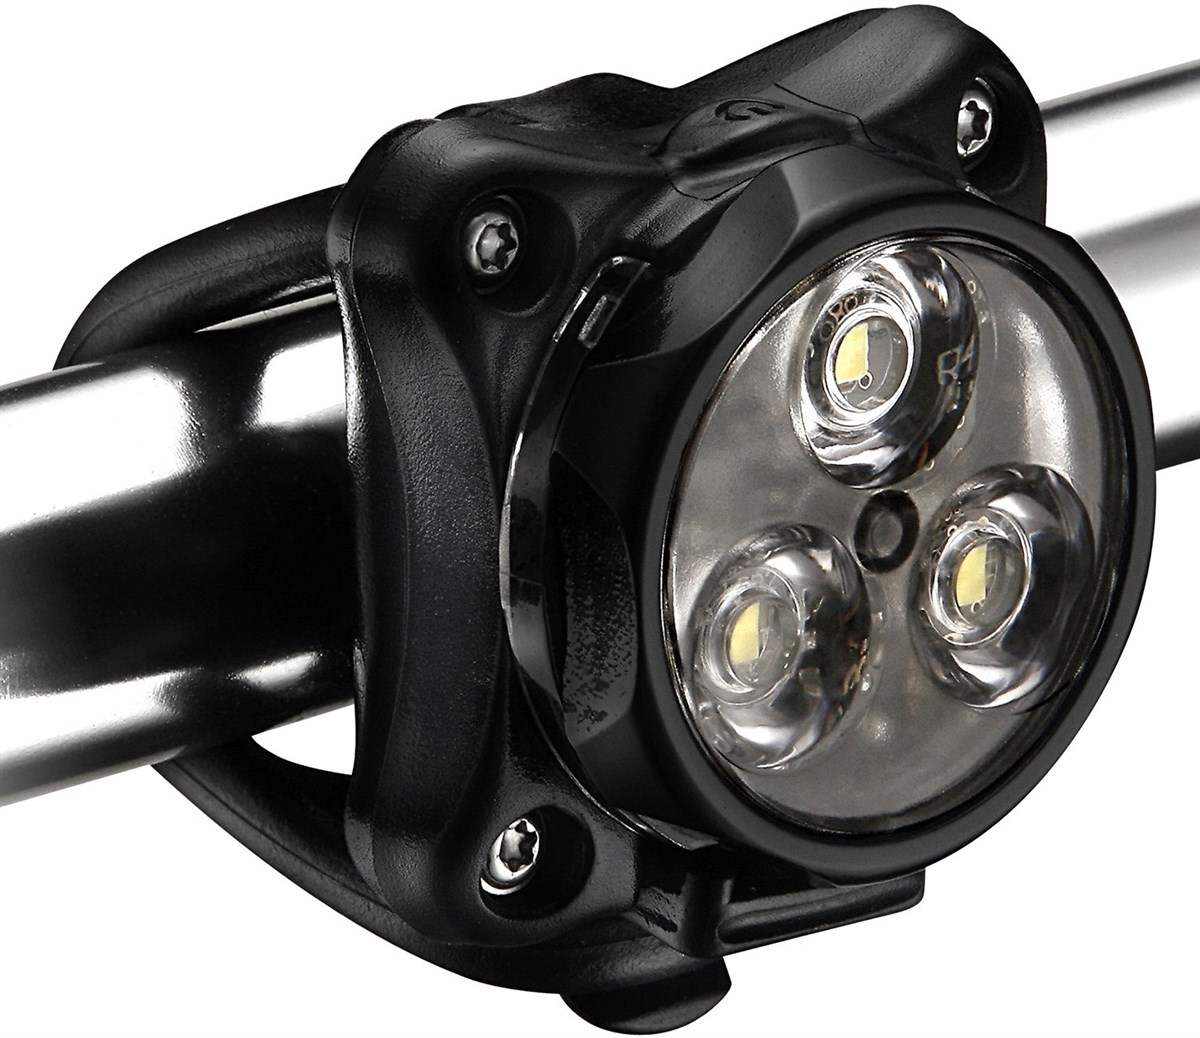 Lezyne Zecto Drive LED USB Rechargeable Front Light product image